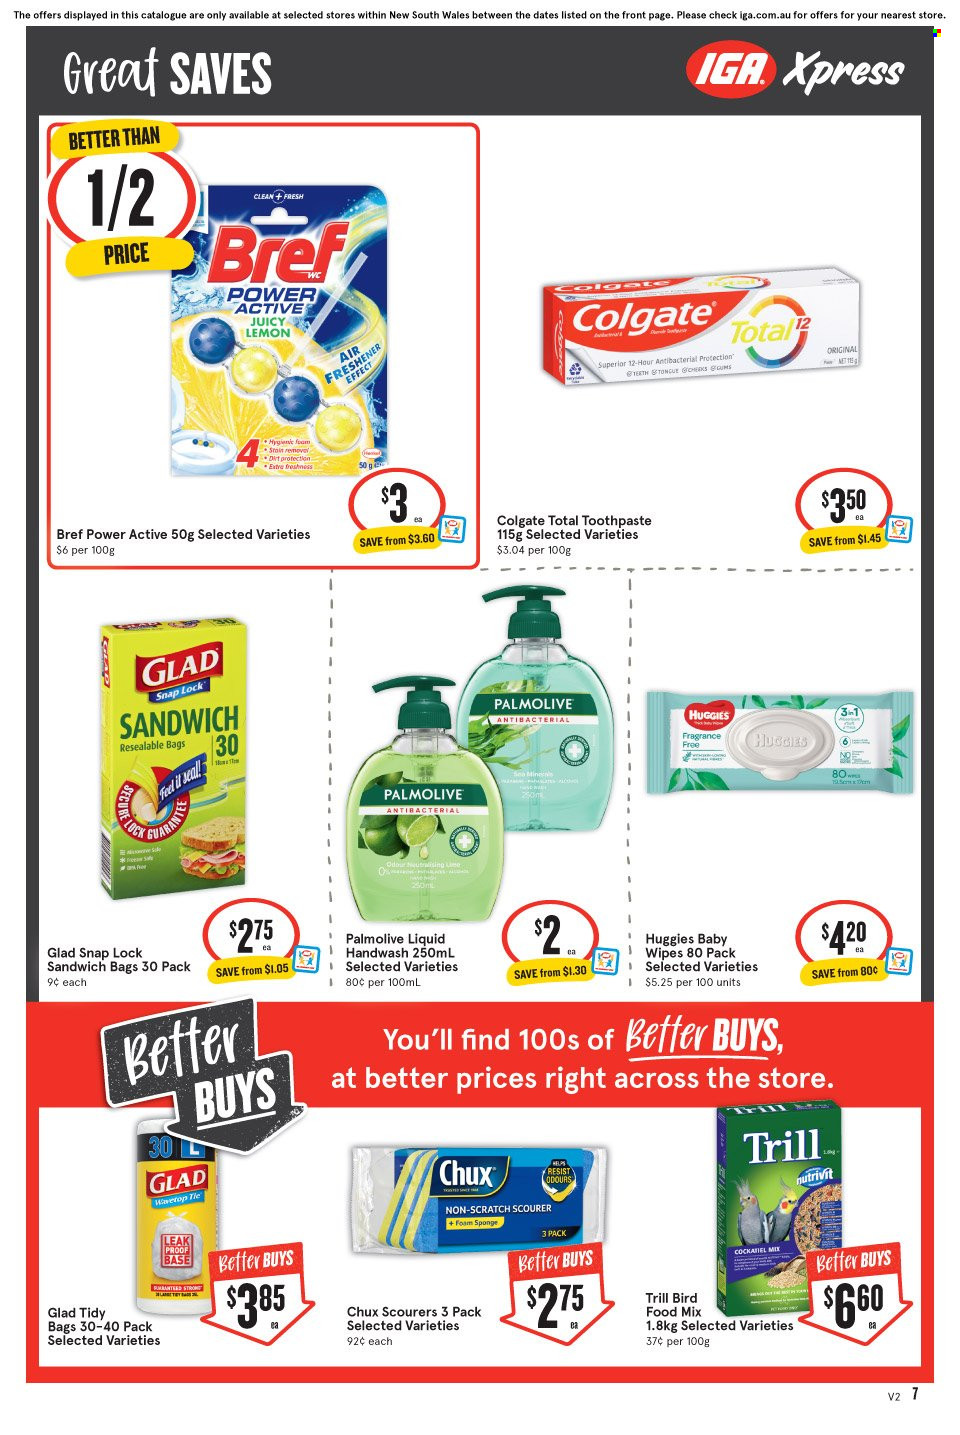 thumbnail - IGA Xpress Catalogue - 18 May 2022 - 24 May 2022 - Sales products - wipes, Huggies, baby wipes, Bref Power, scourer, hand wash, Palmolive, Colgate, toothpaste, bag, sponge, animal food, bird food. Page 18.